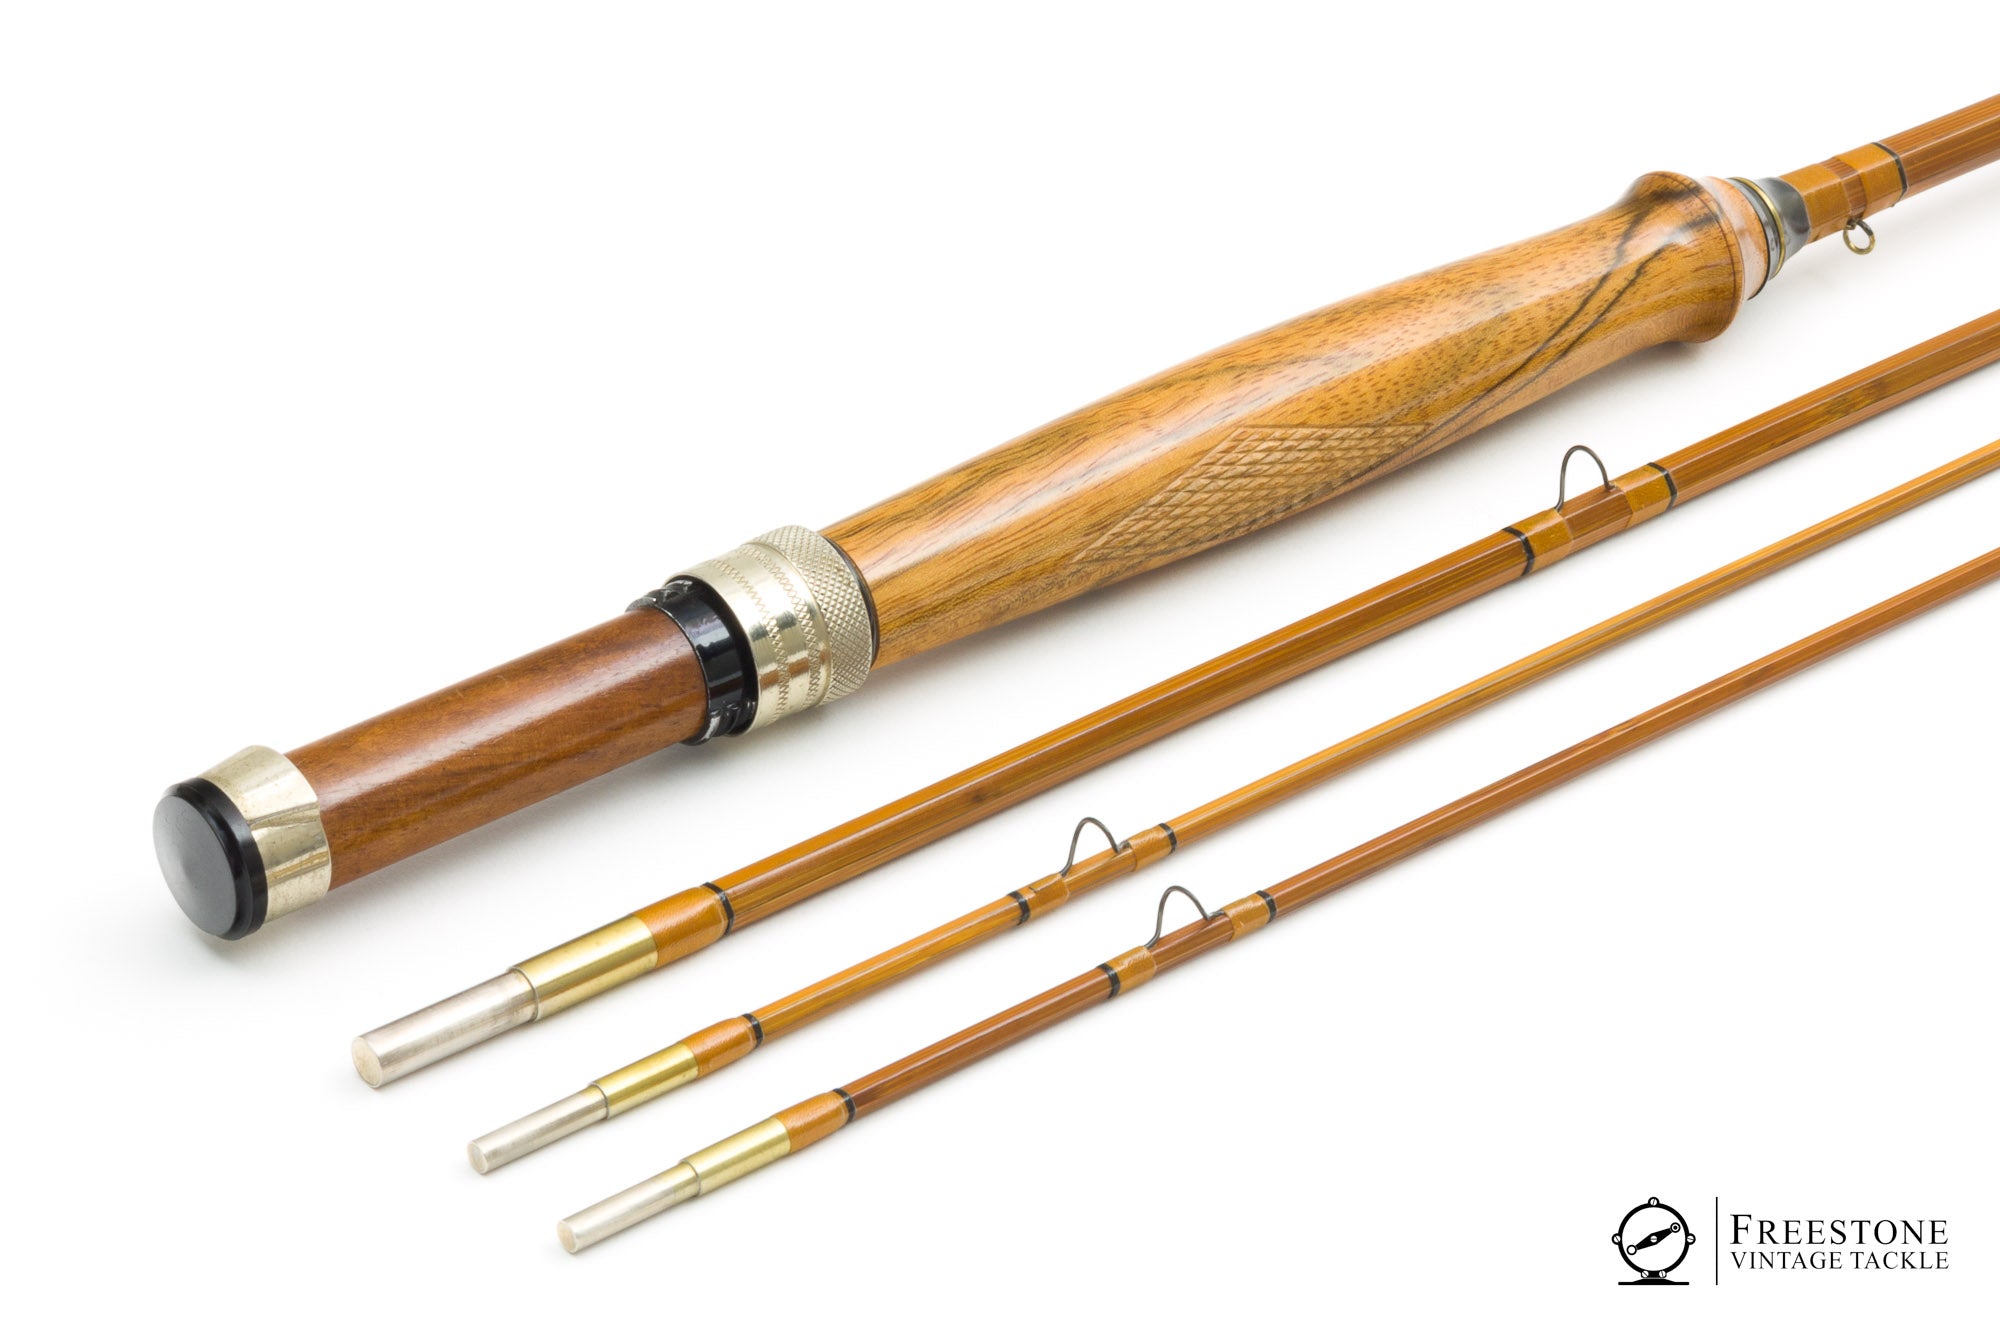 HEDDON 7’6” BAMBOO FLY ROD 2/2 MODEL 17 FEATHERWEIGHT